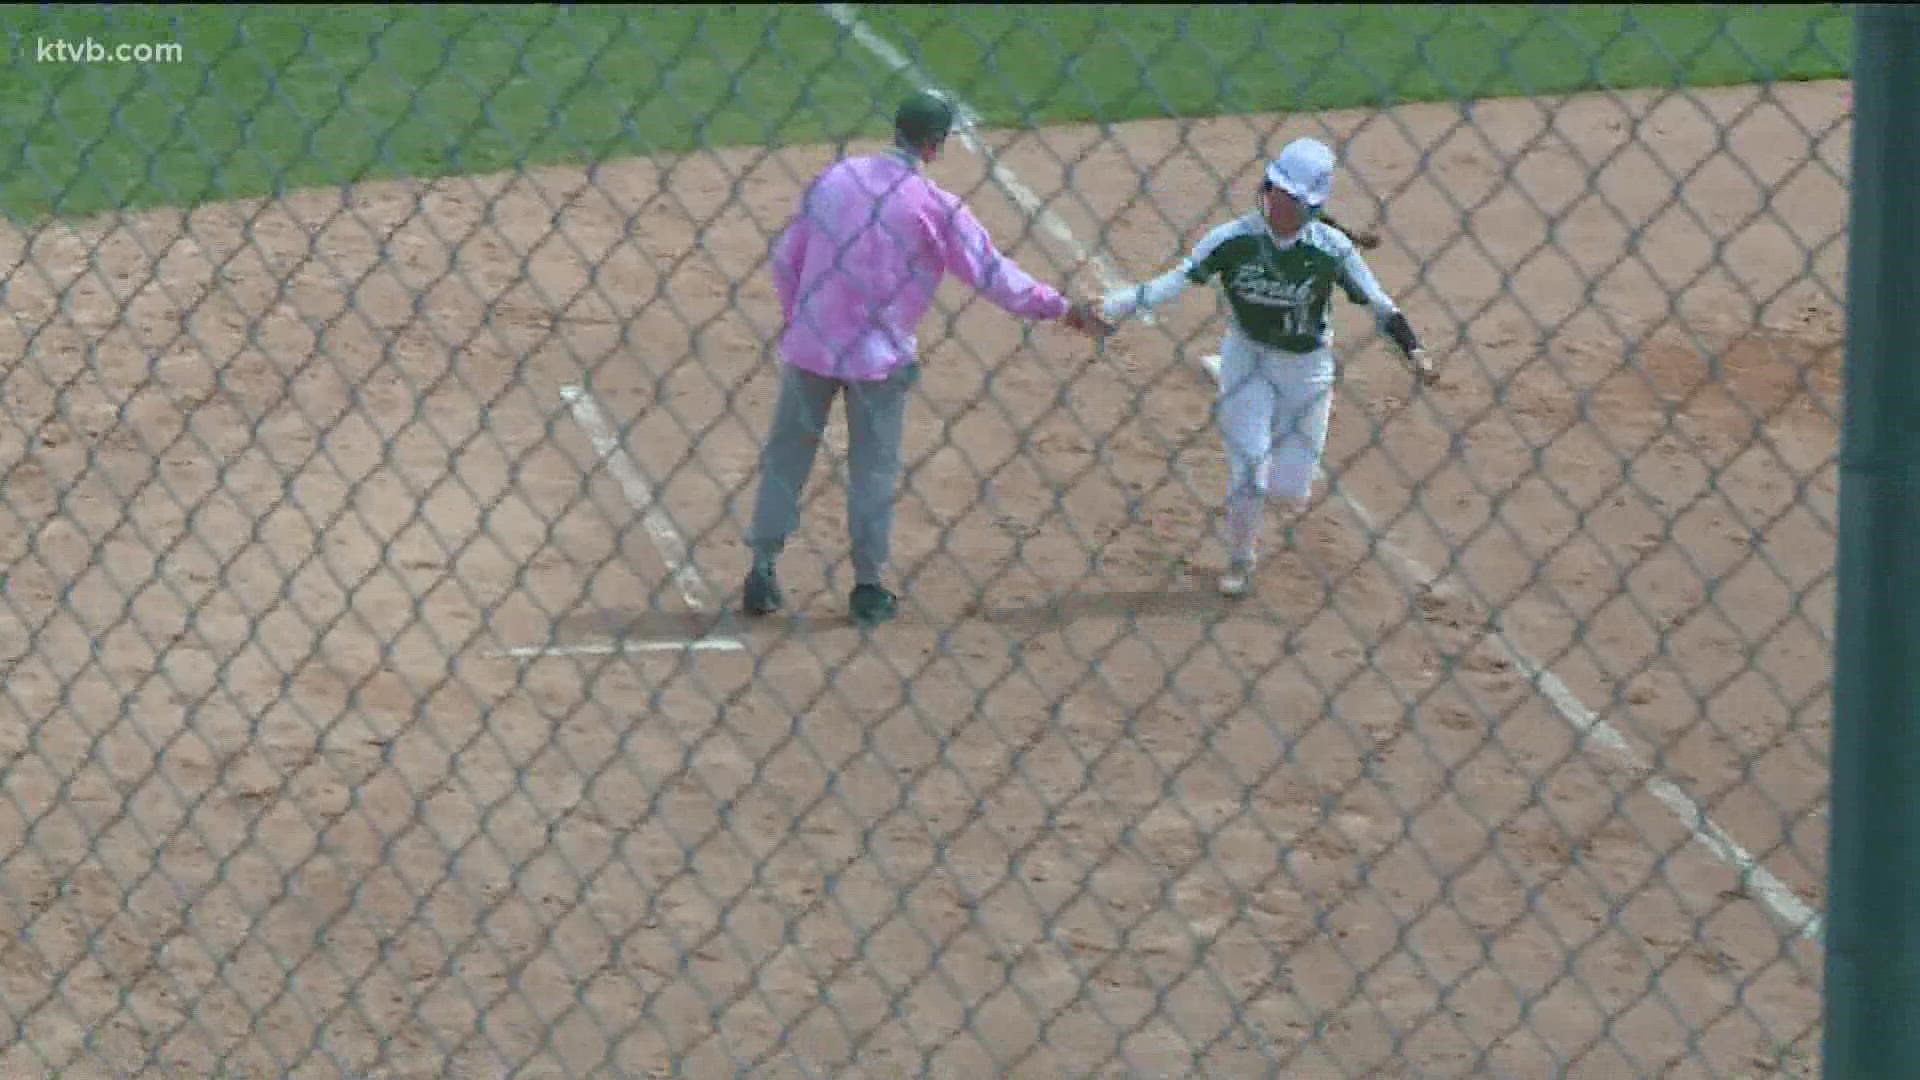 Borah defeated their cross-town rival 5-3 on Saturday at home to advance in the 5A Southern Idaho Conference softball district tournament.